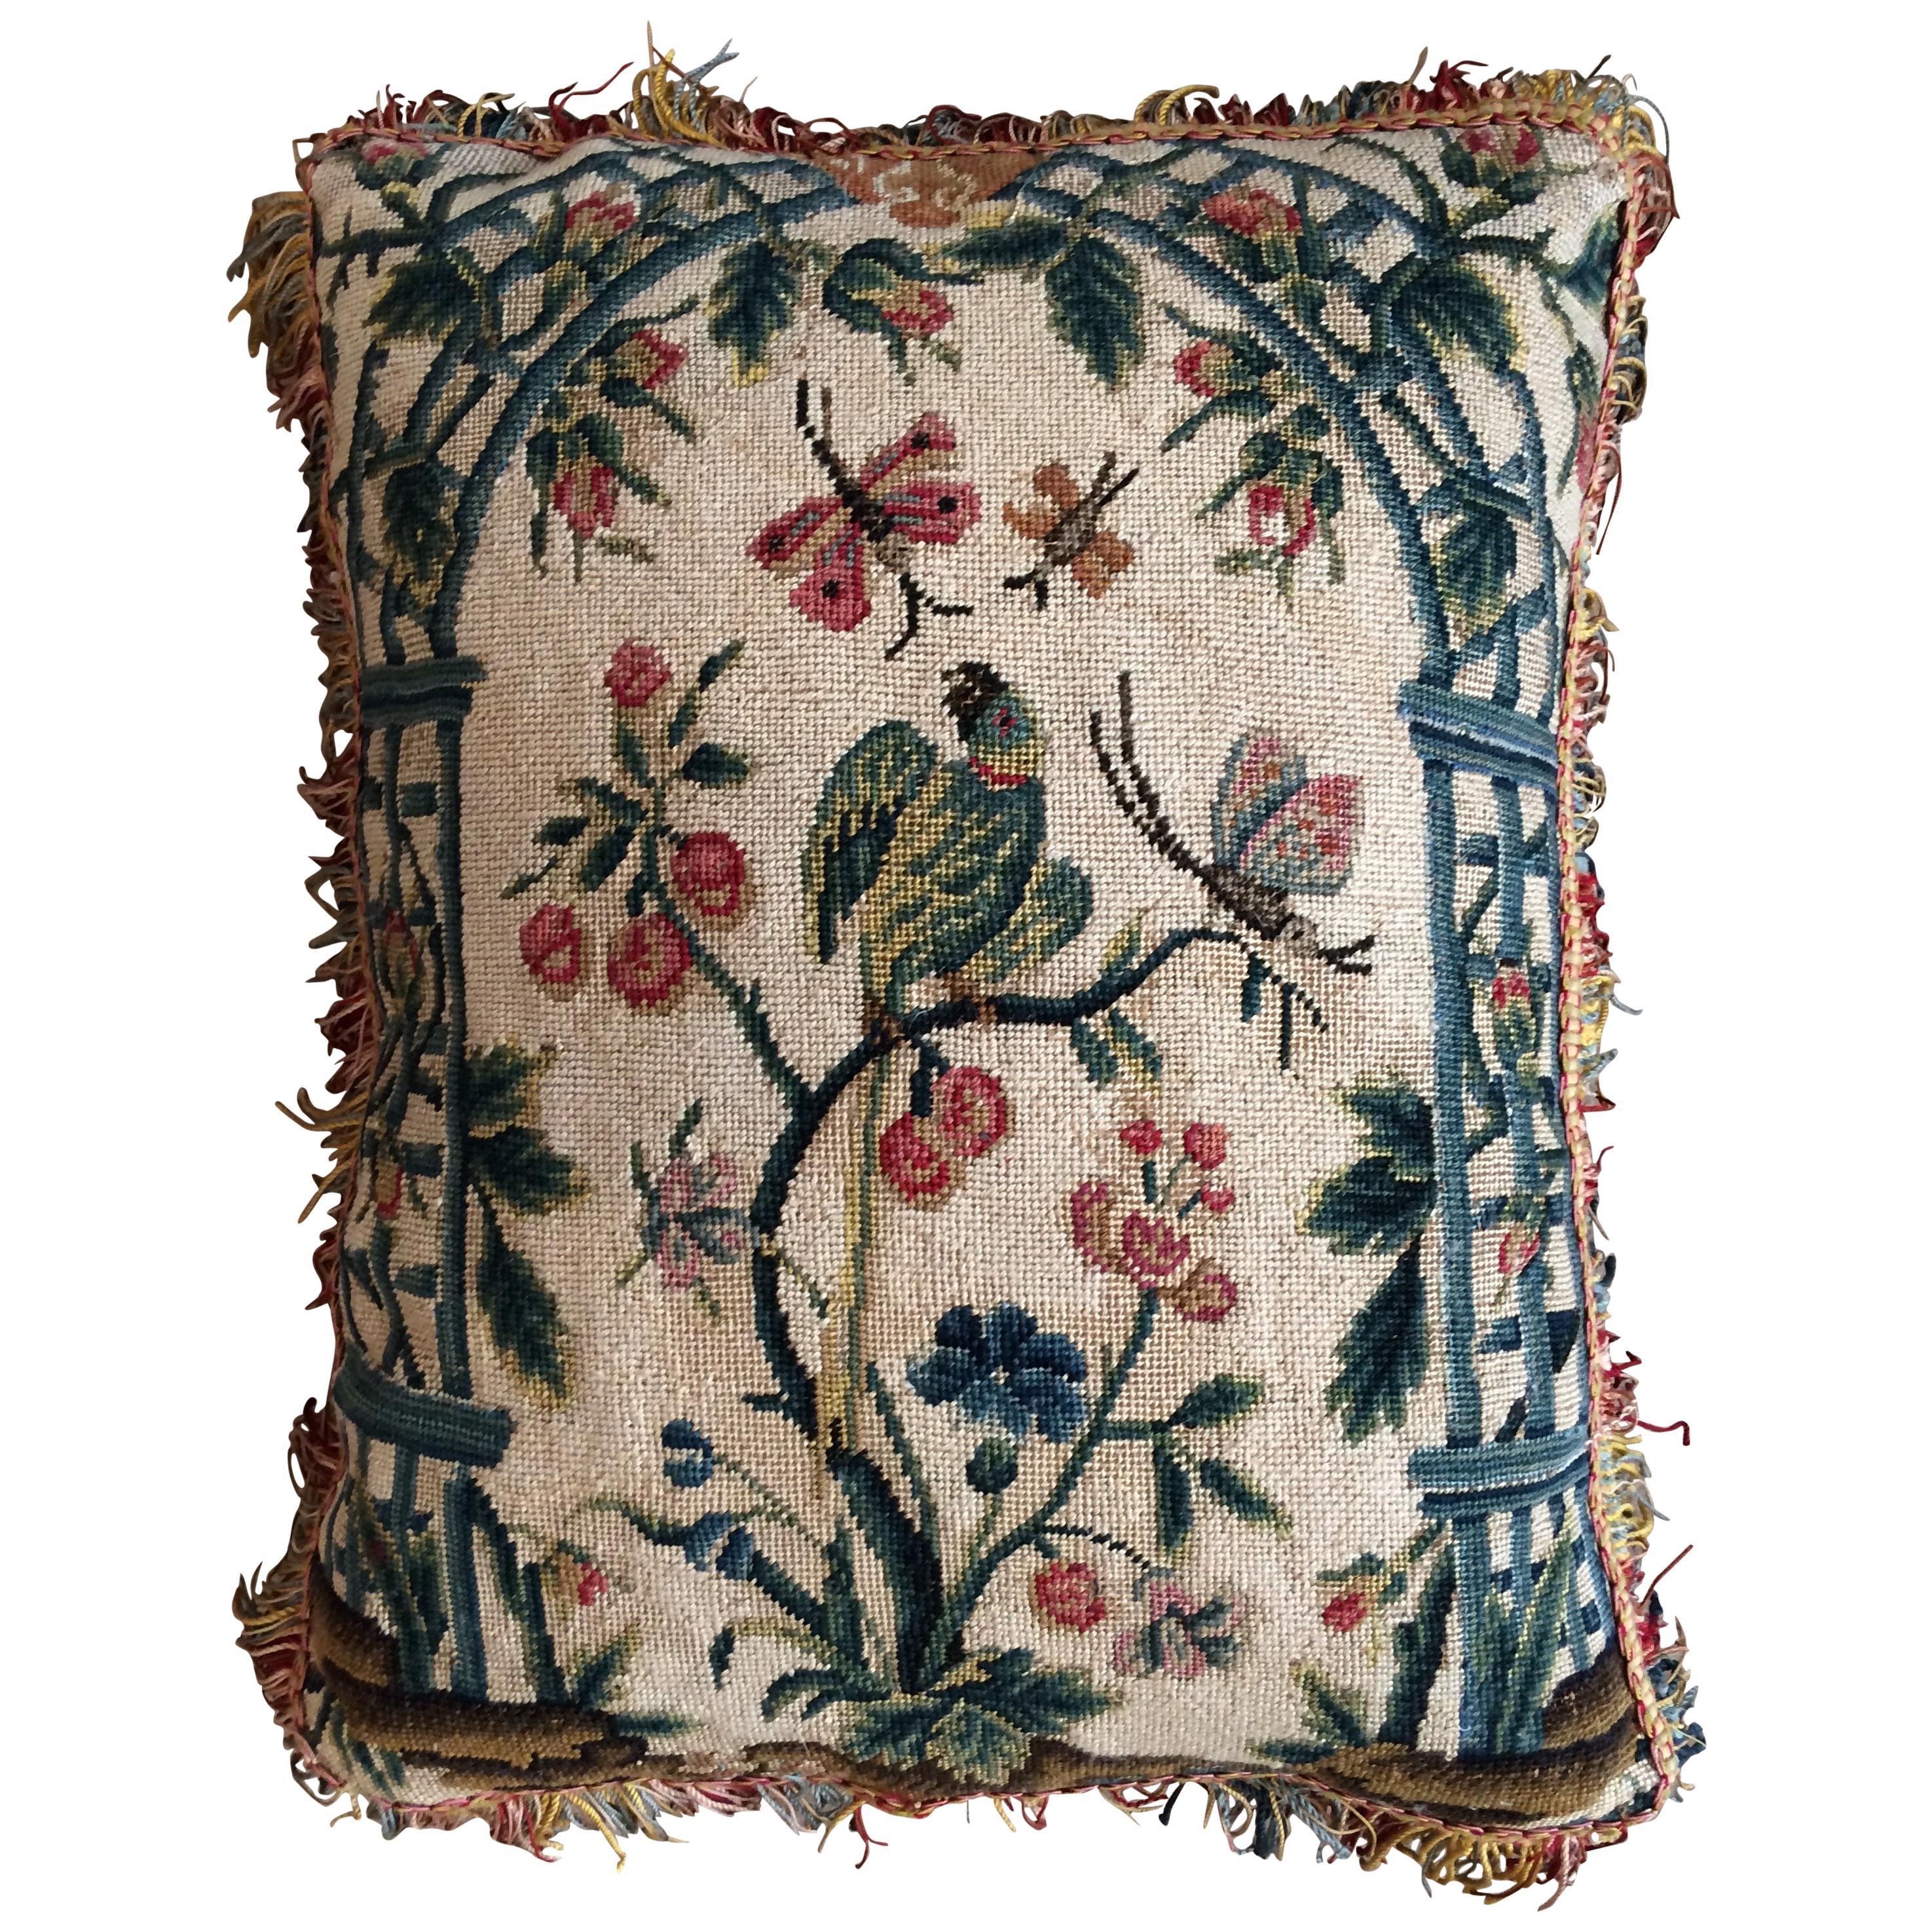 Cushion of Late 18th Century French Needlework with a Green Parakeet